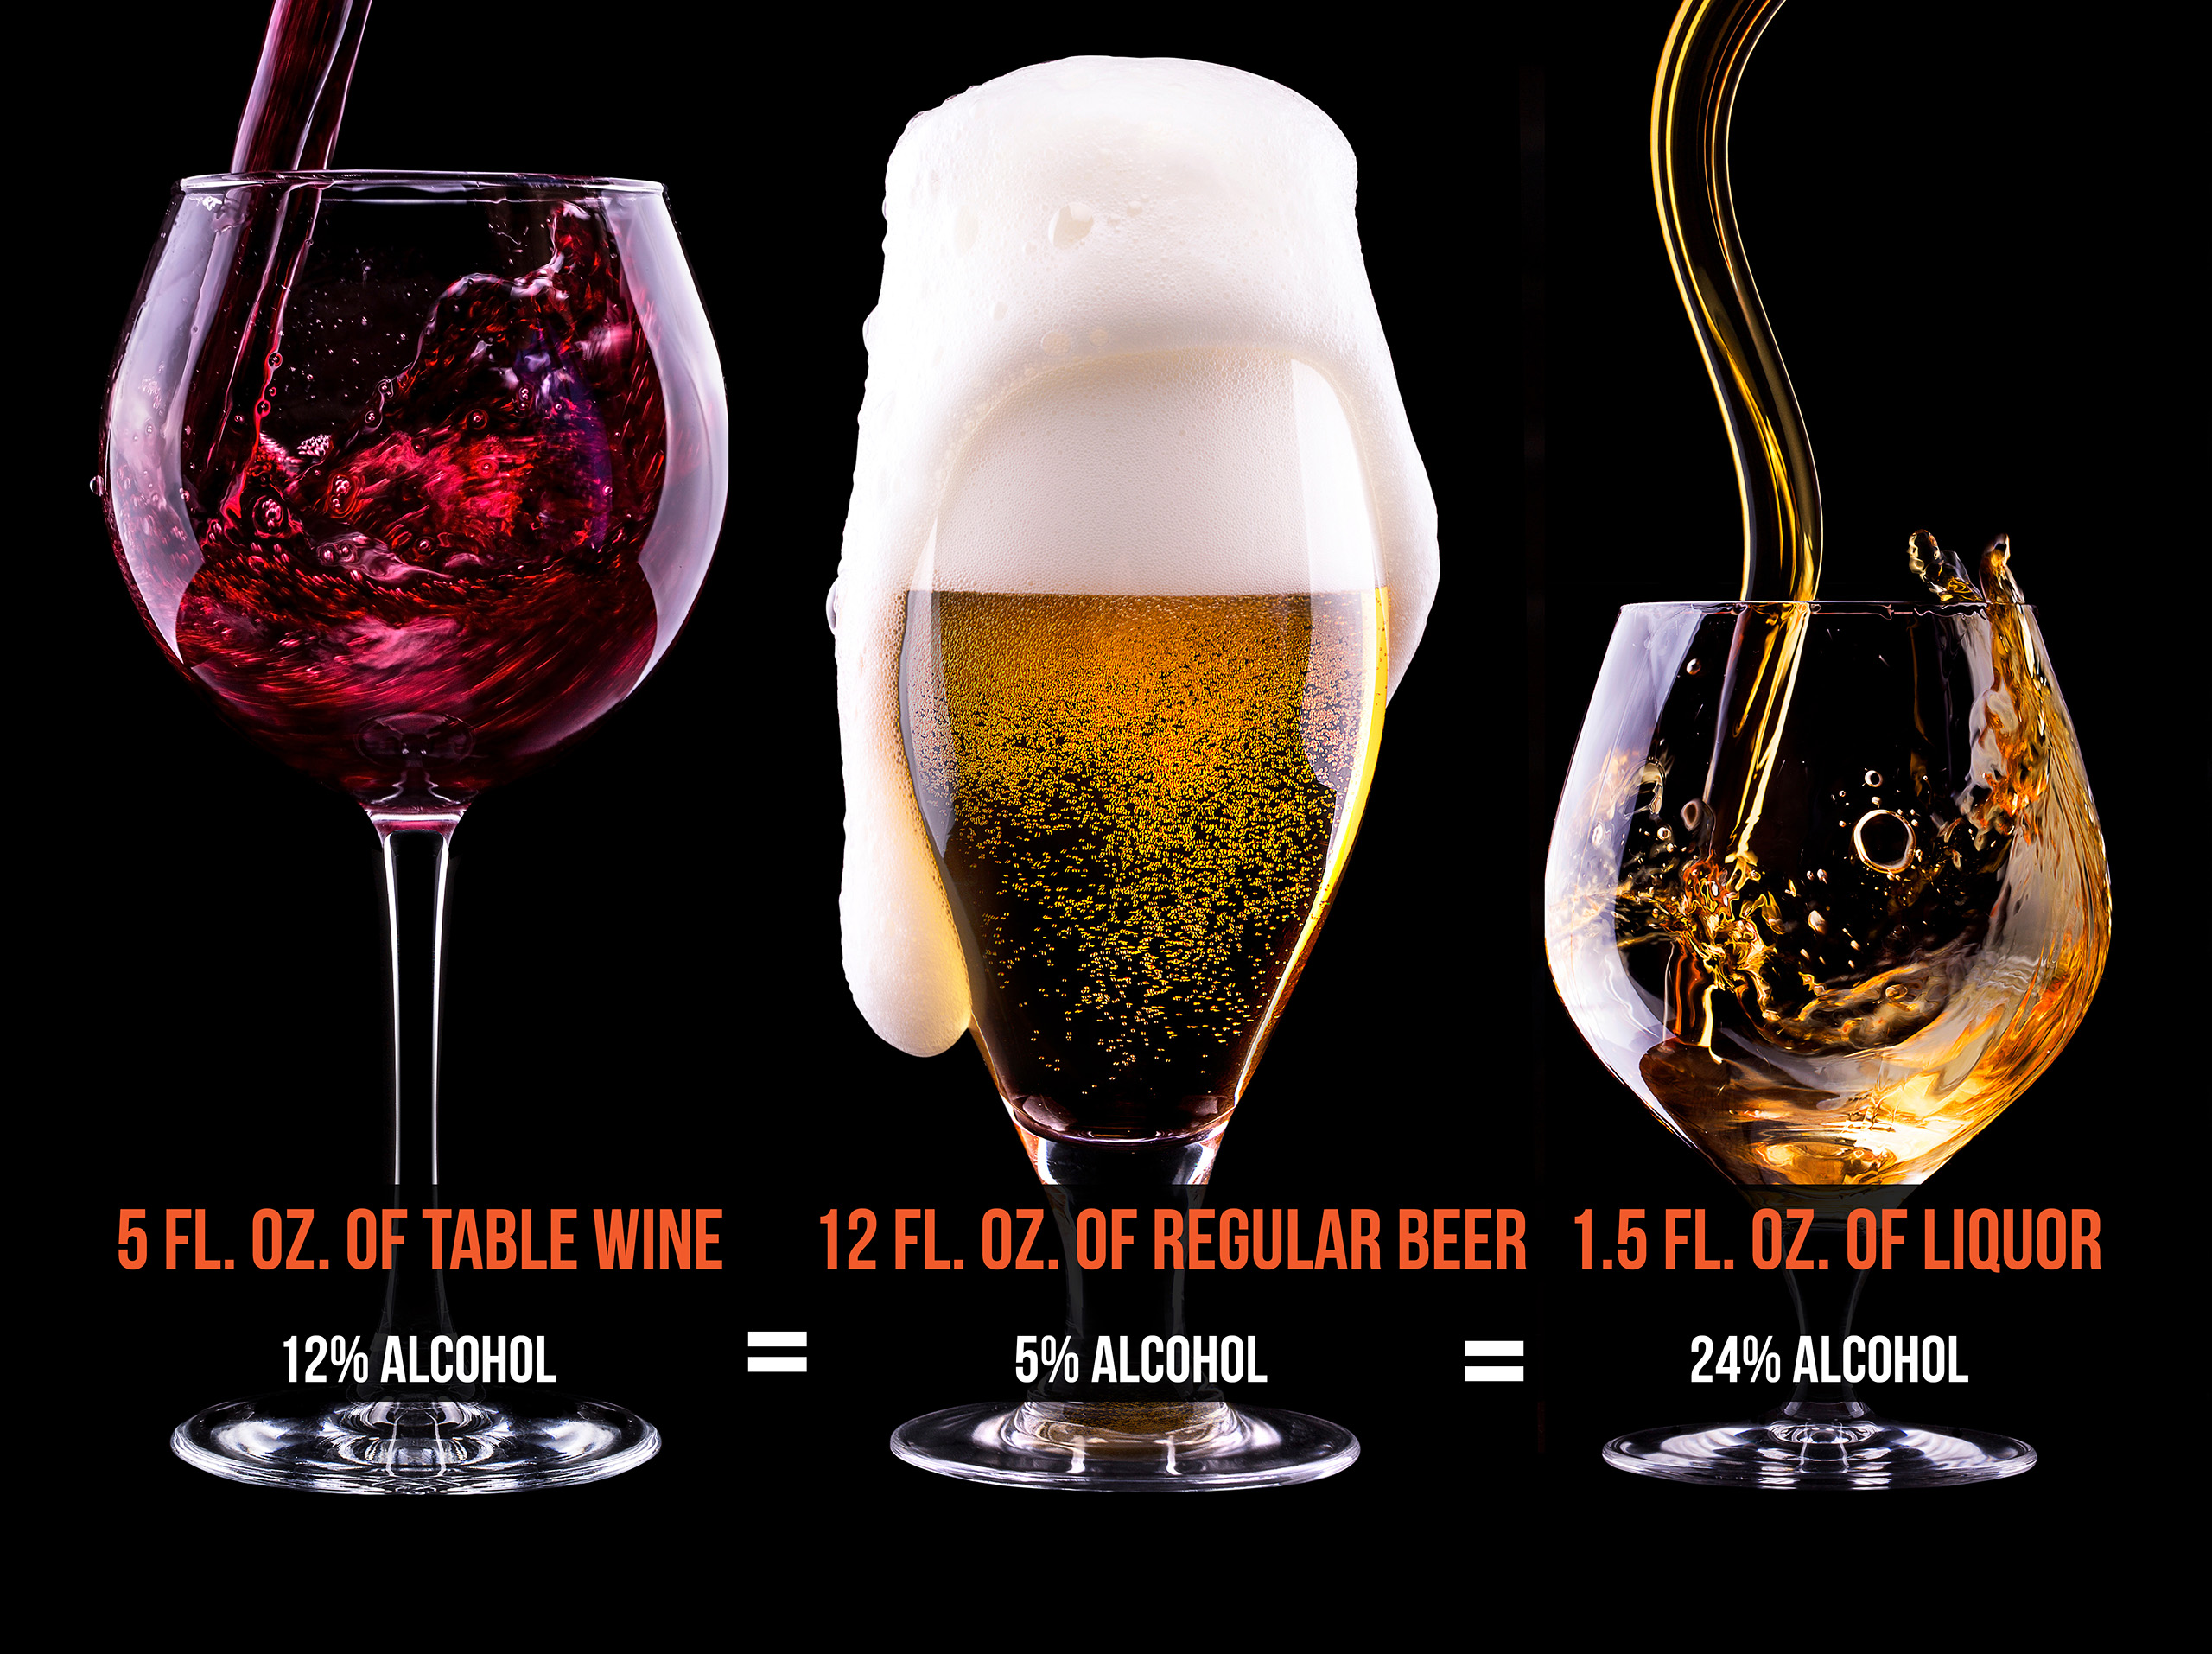 5 ounces of table wine is 12% alcohol which equals 12 ounces of regular beer at 5% alcohol which equals 1.5 ounces of liquor at 24% alcohol.